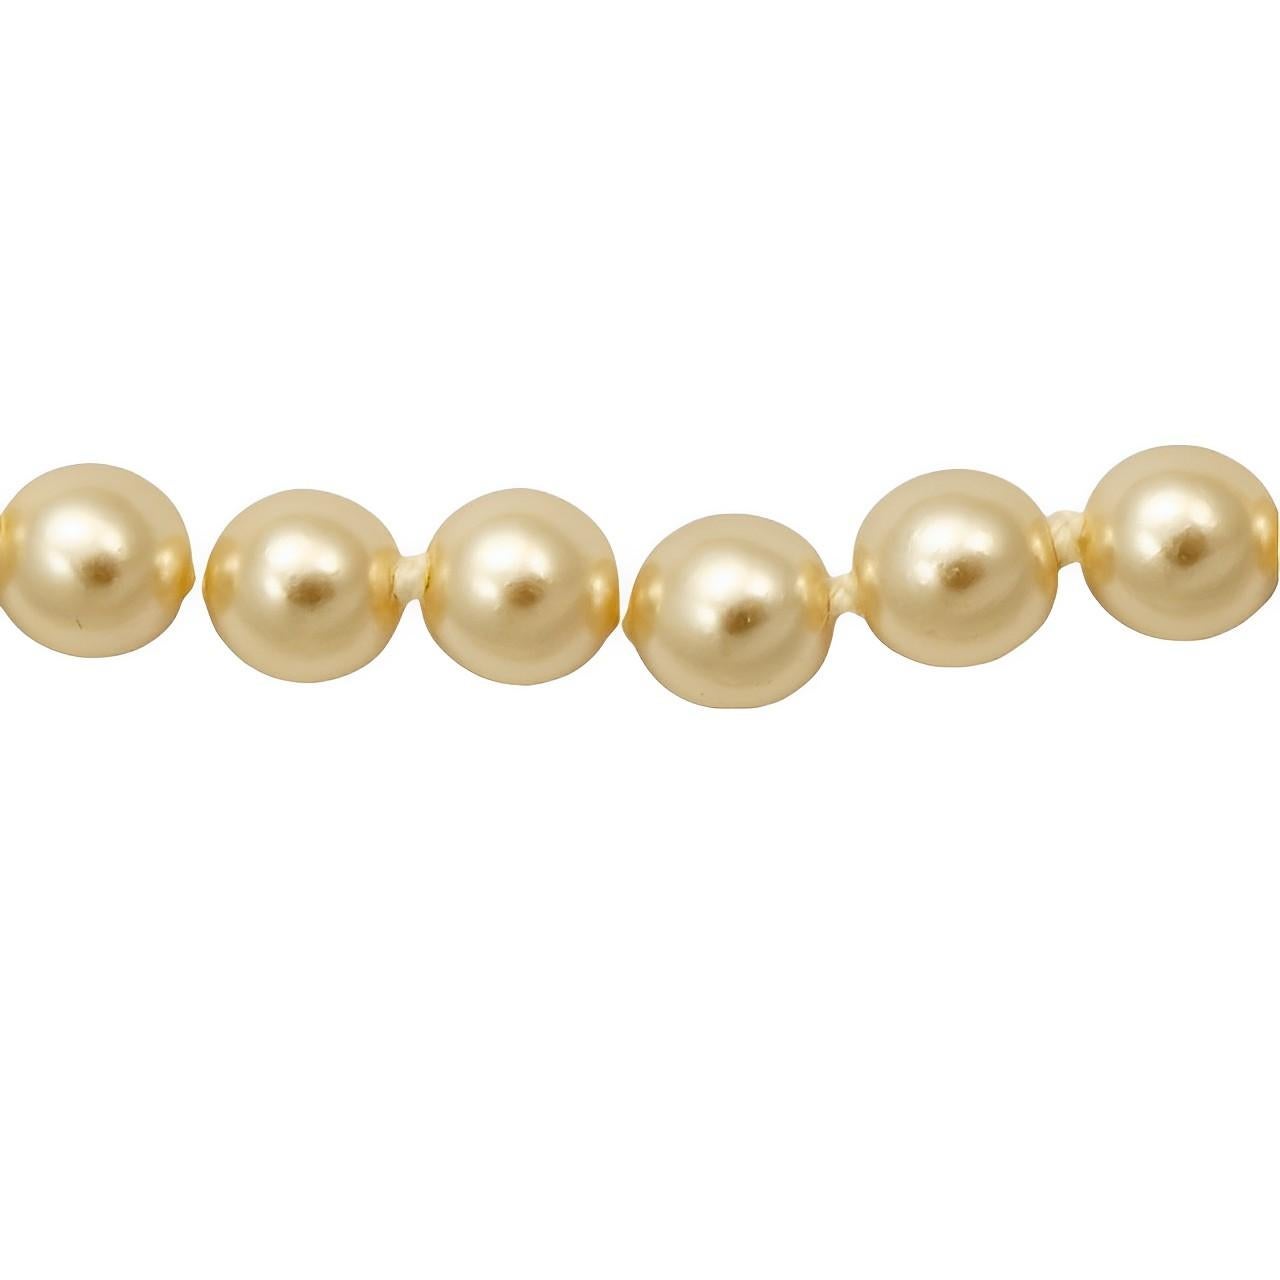 Long Cream Glass Pearl Necklace with a Gold Plated and Pearl Clasp In Good Condition For Sale In London, GB